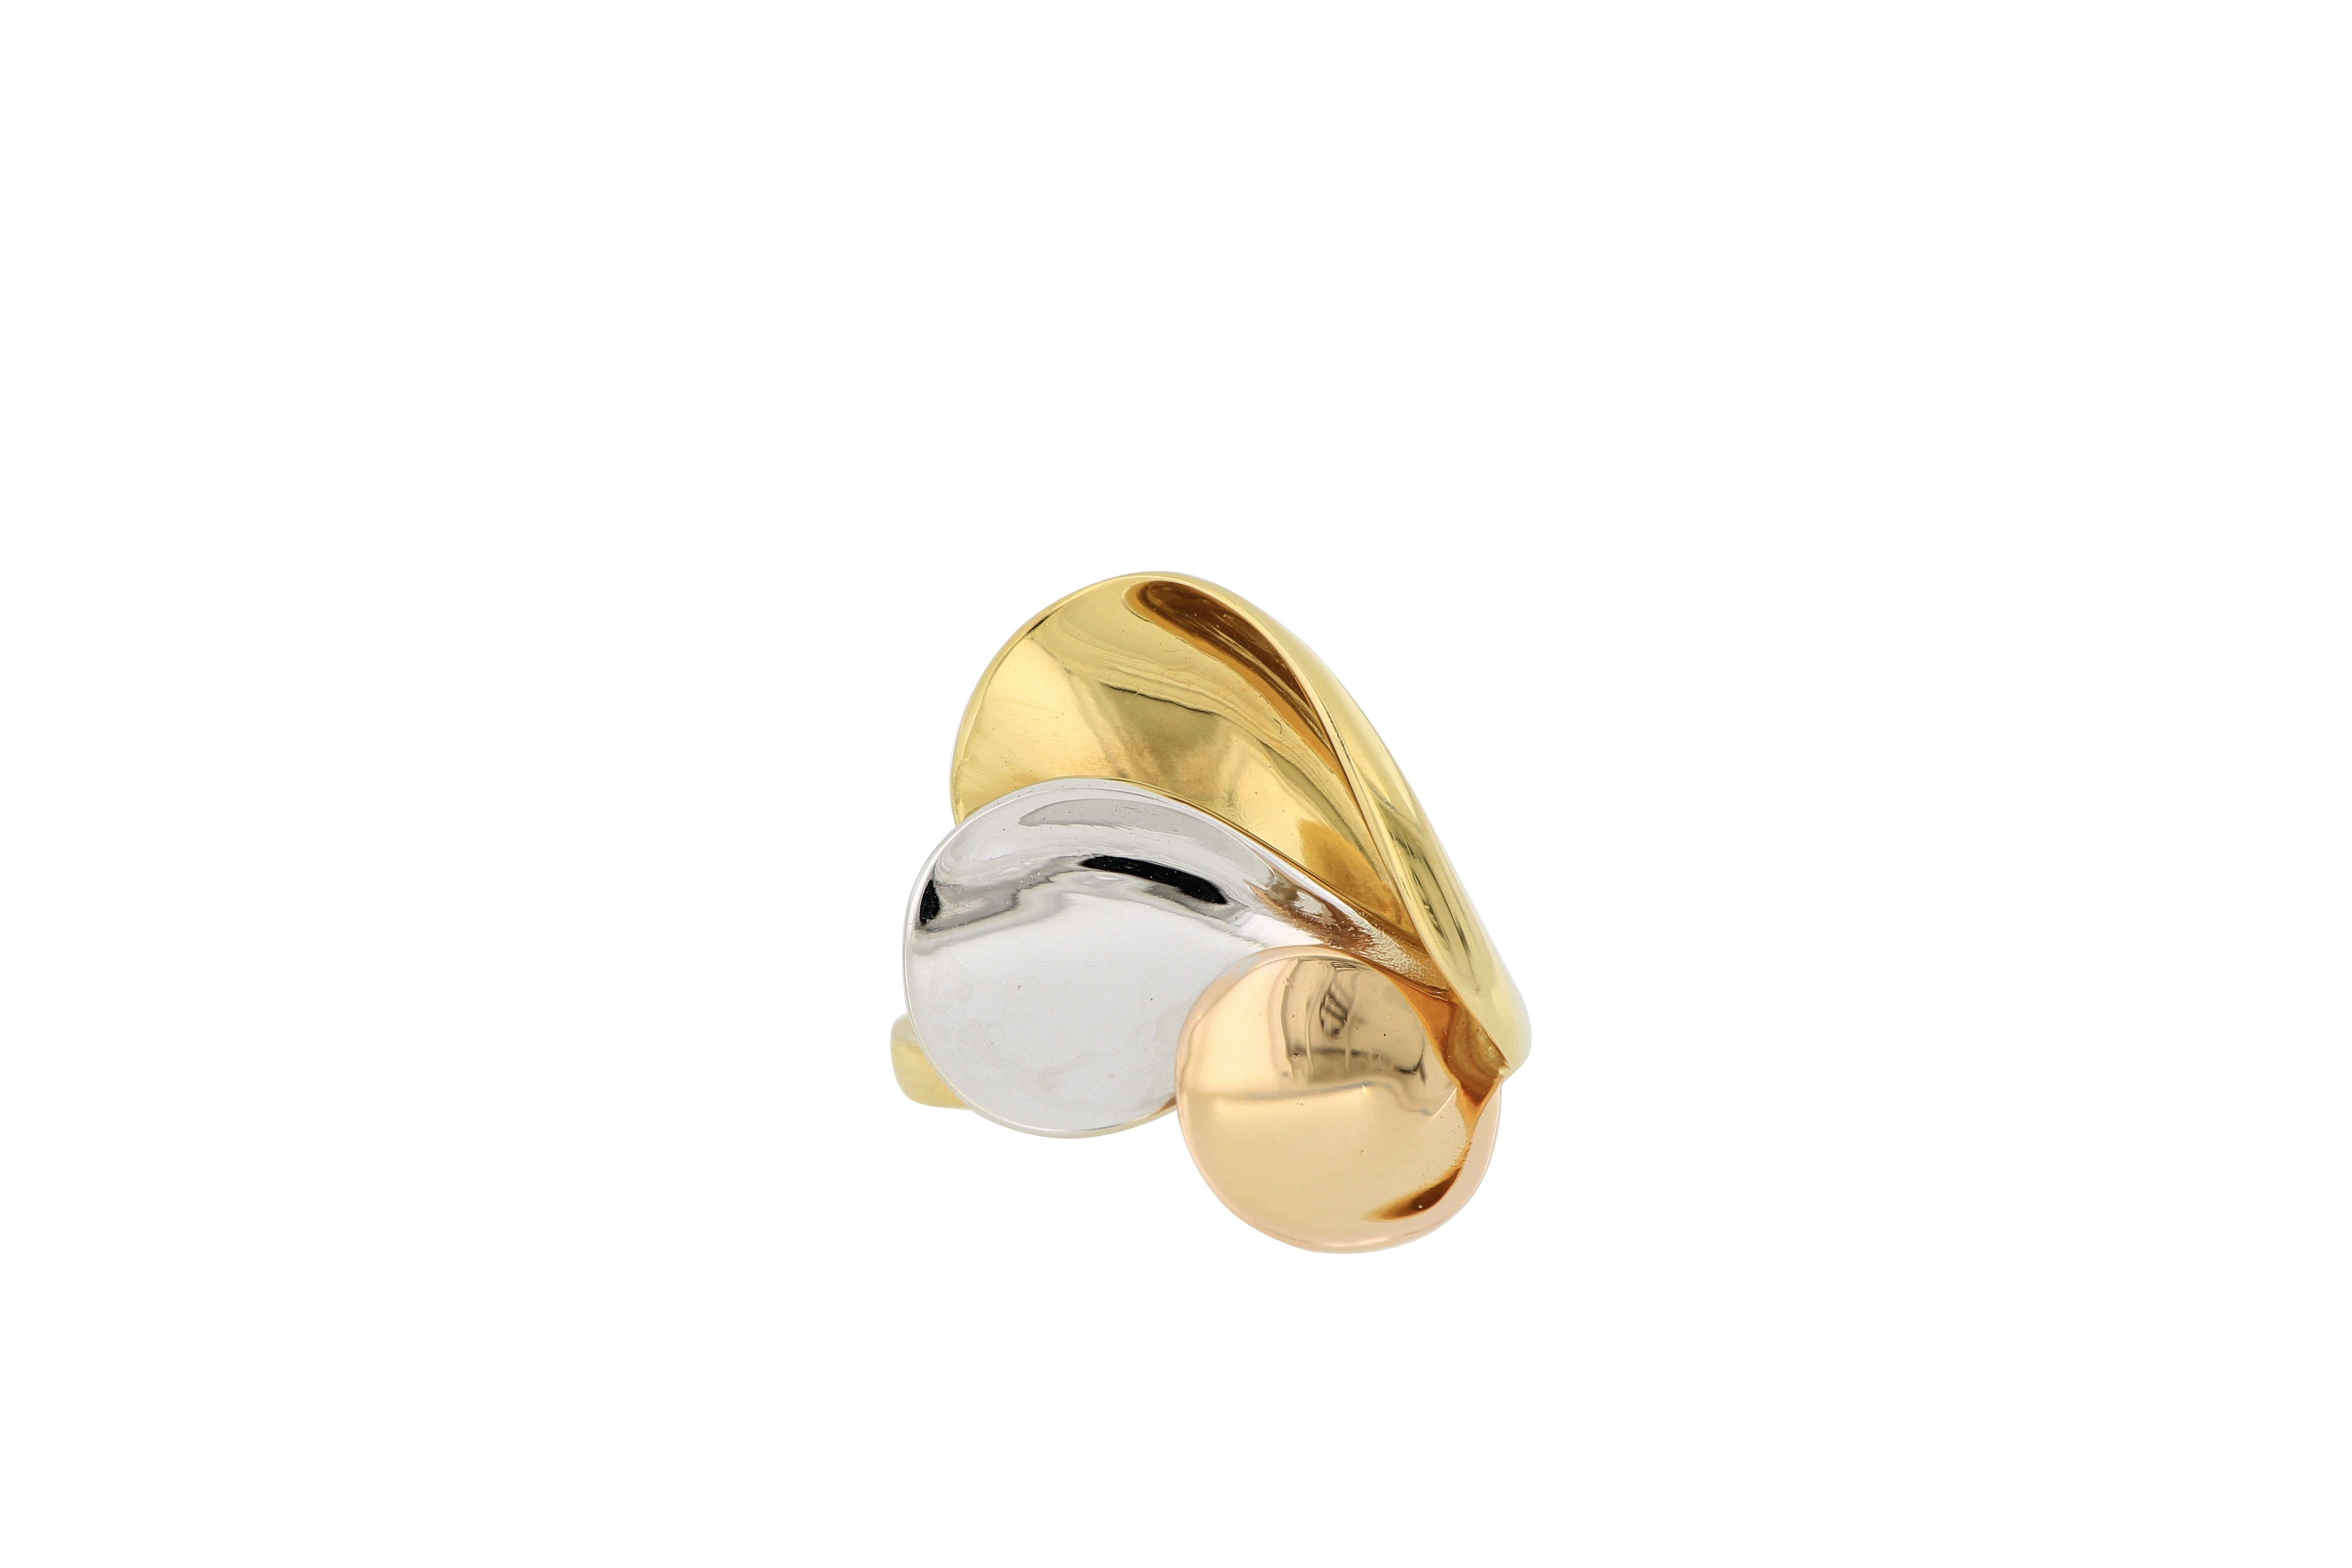 A stylish Italian 18 karat gold ring. A very tricolour beautiful ring with simple and elegant design which can be worn for any occasion.
O’Che 1867 was founded one and a half centuries ago in Macau. The brand is renowned for its high jewellery